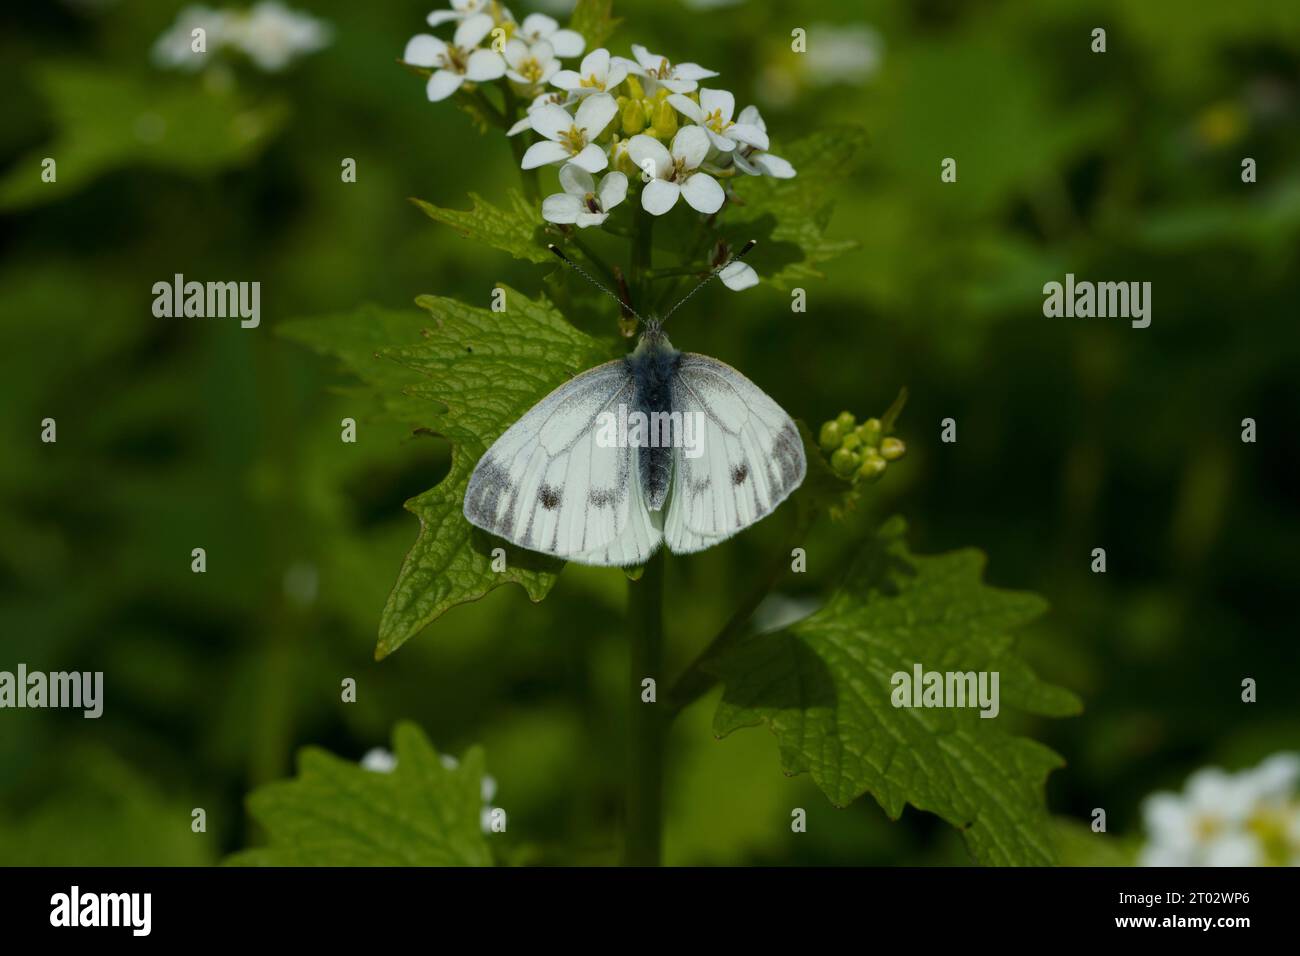 Pieris napi Artogeia napi Family Pieridae Genus Pieris Green-veined white butterfly wild nature insect photography, picture, wallpaper Stock Photo